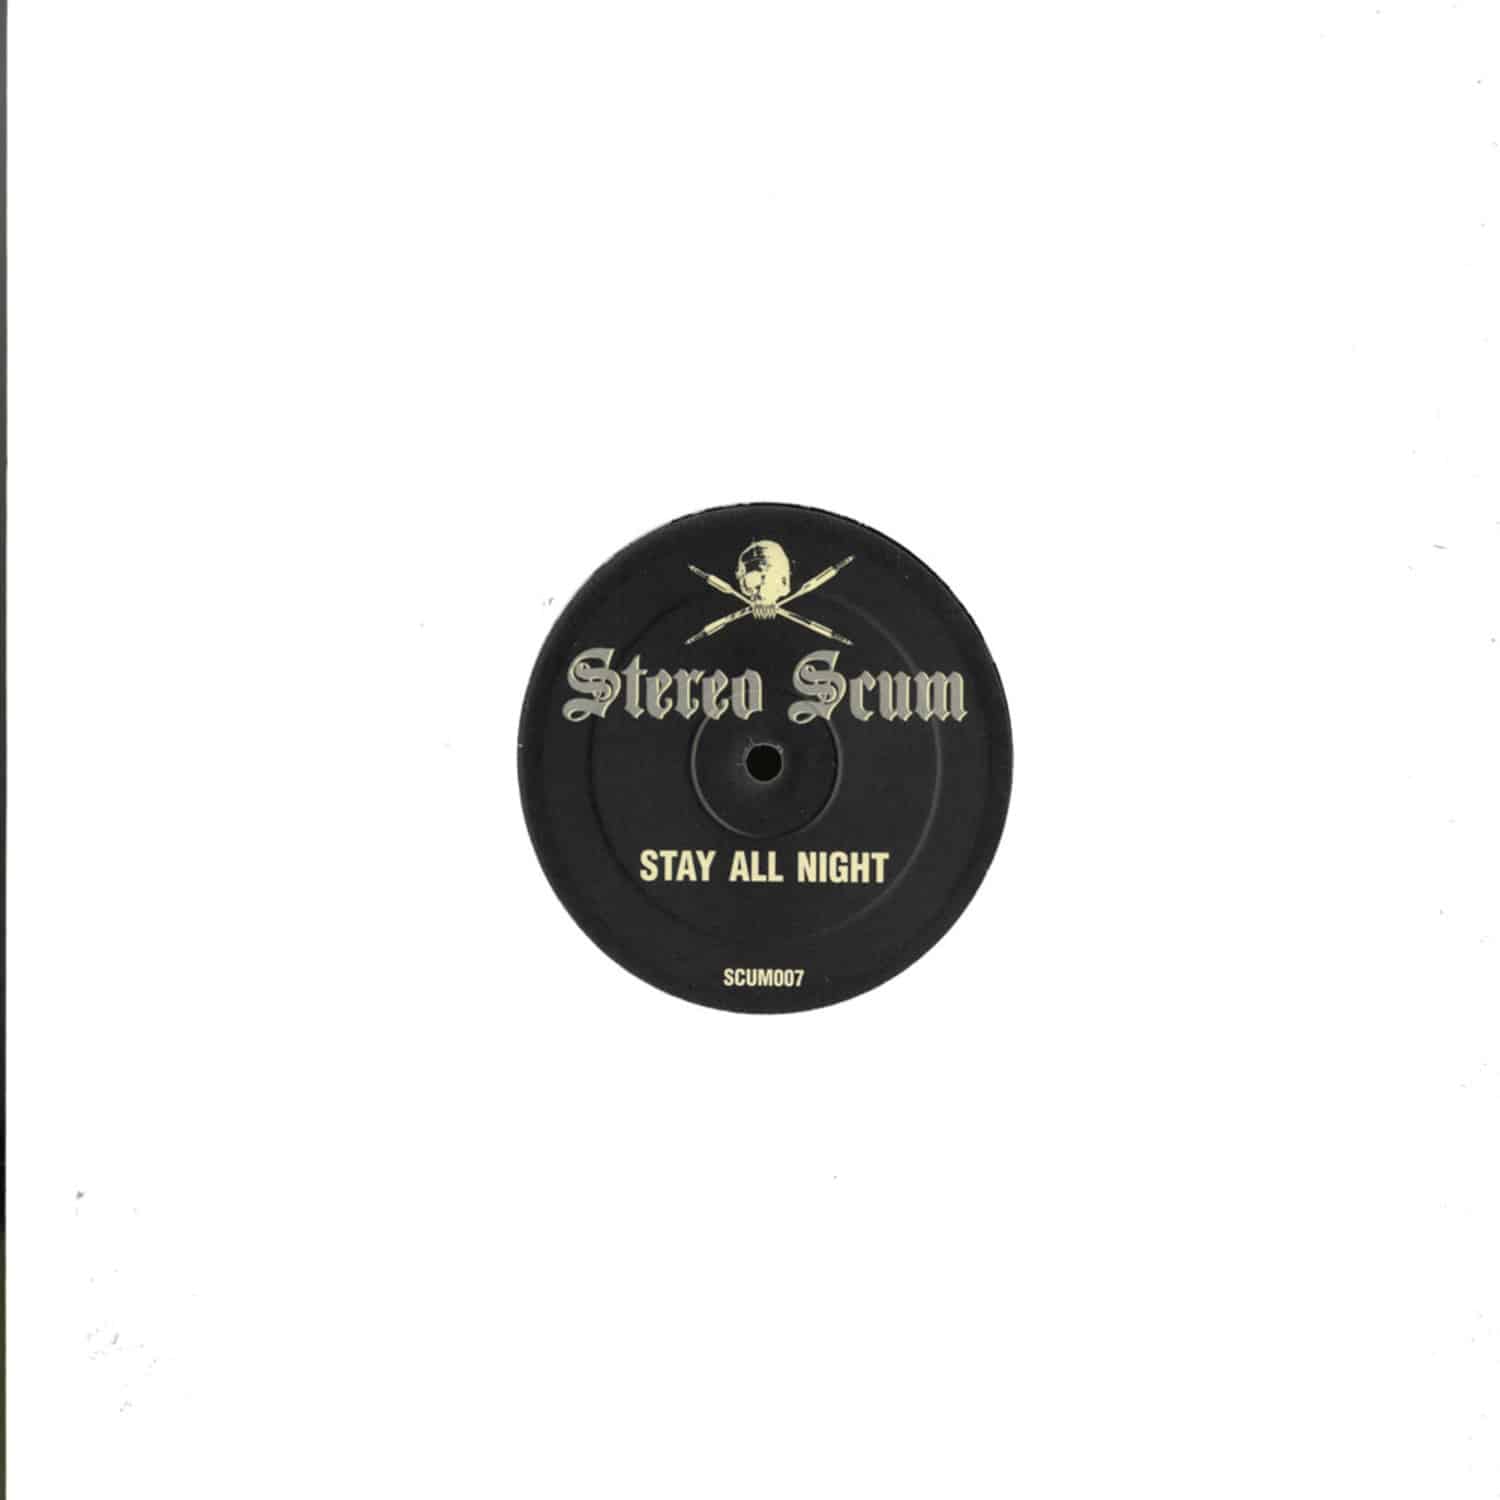 Stereo Scum vs Hoxton Whores - STAY ALL NIGHT